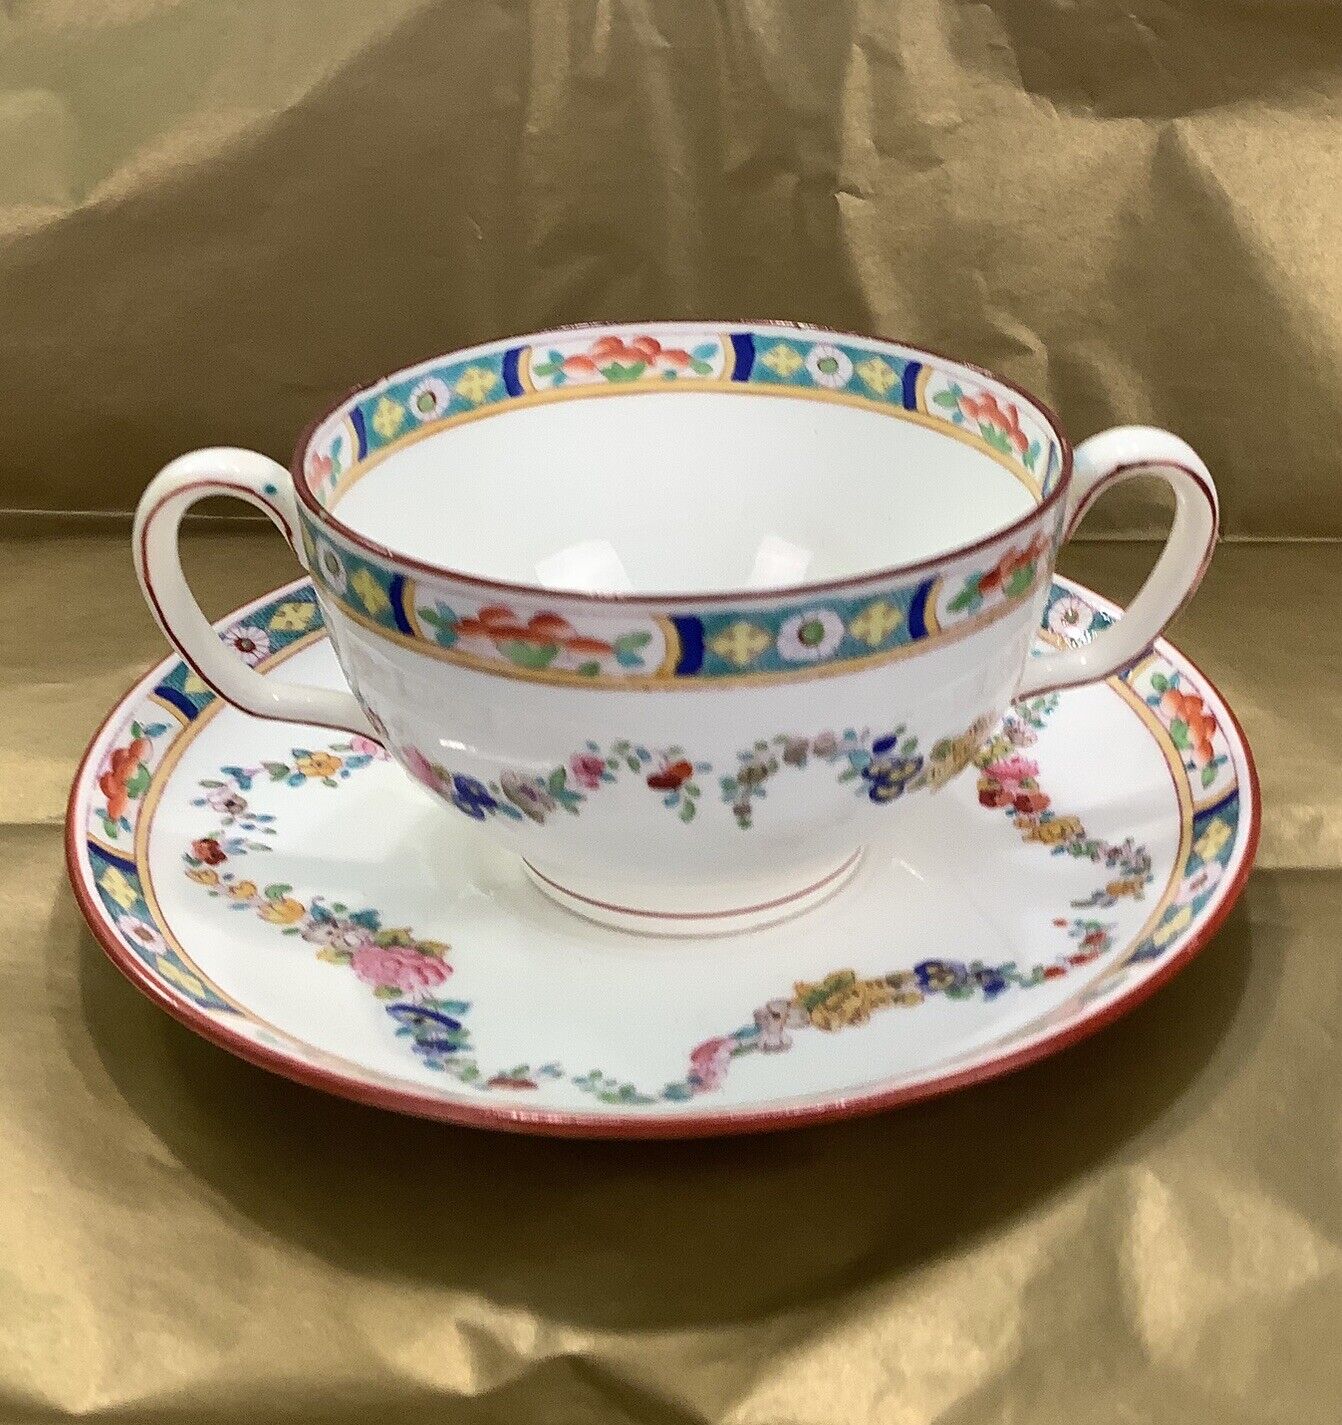 Minton Rose China Hand Painted Tea Cup and Saucer Floral Swag circa 1900 Antique